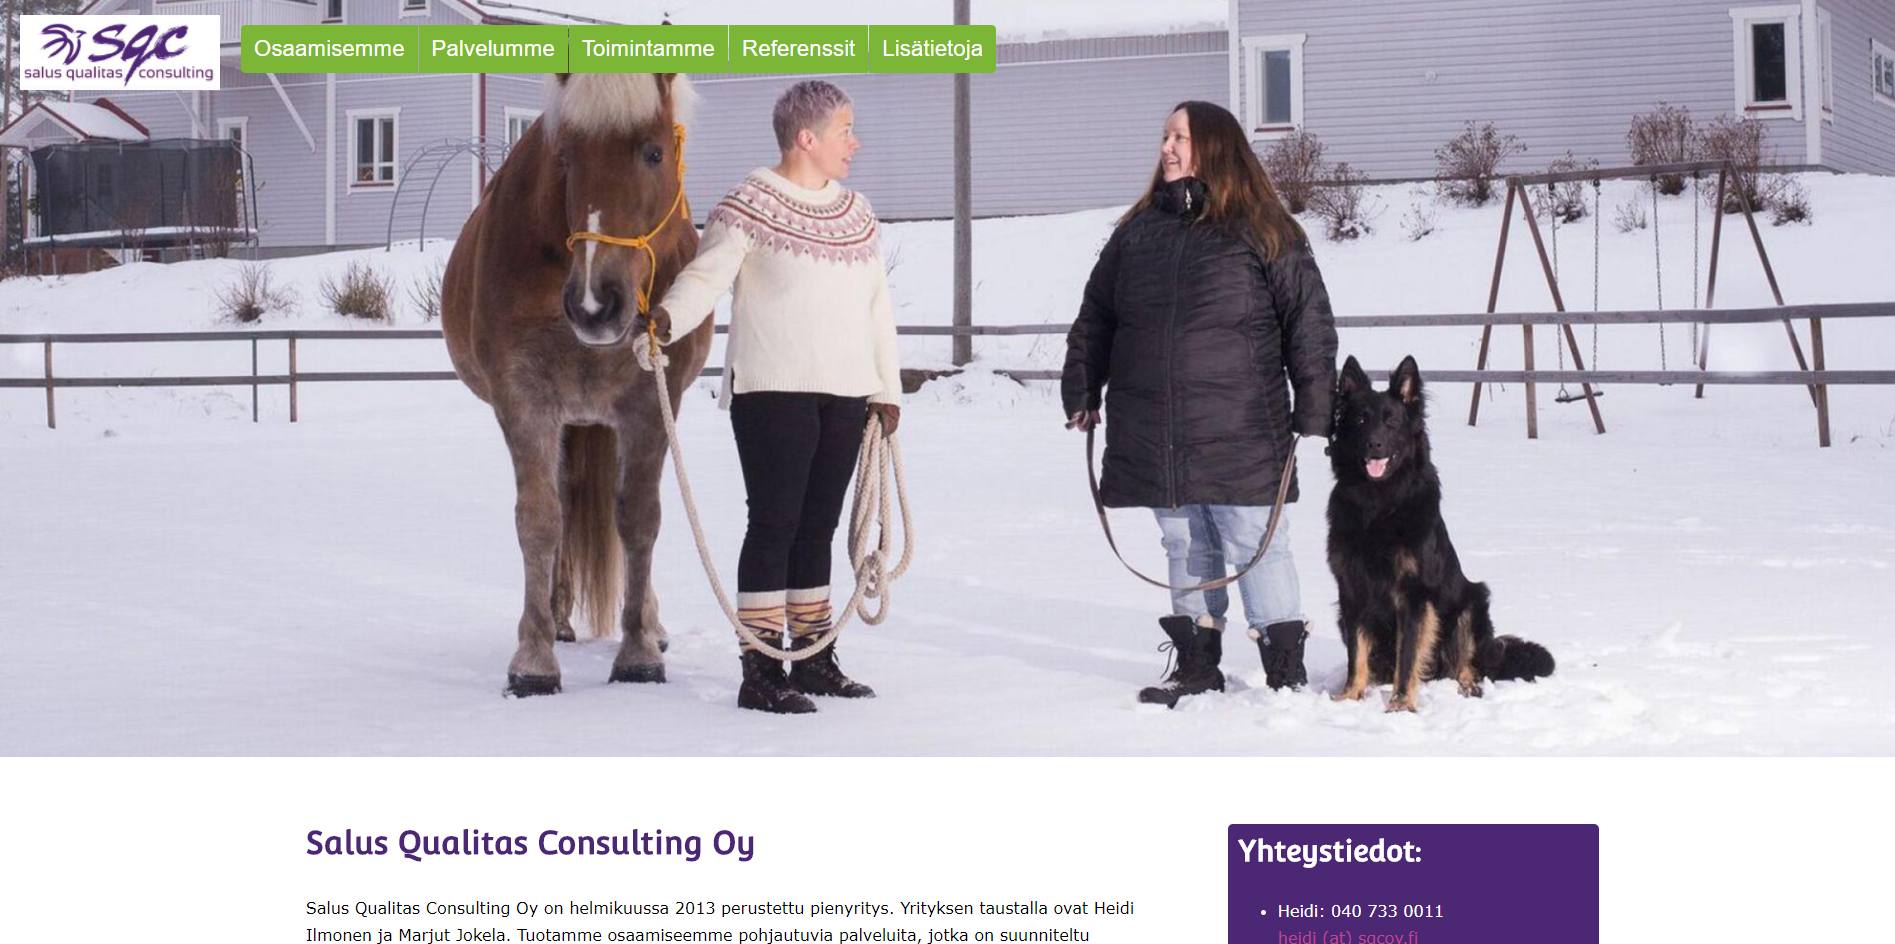 Salus Qualitas Consulting Oy - front page